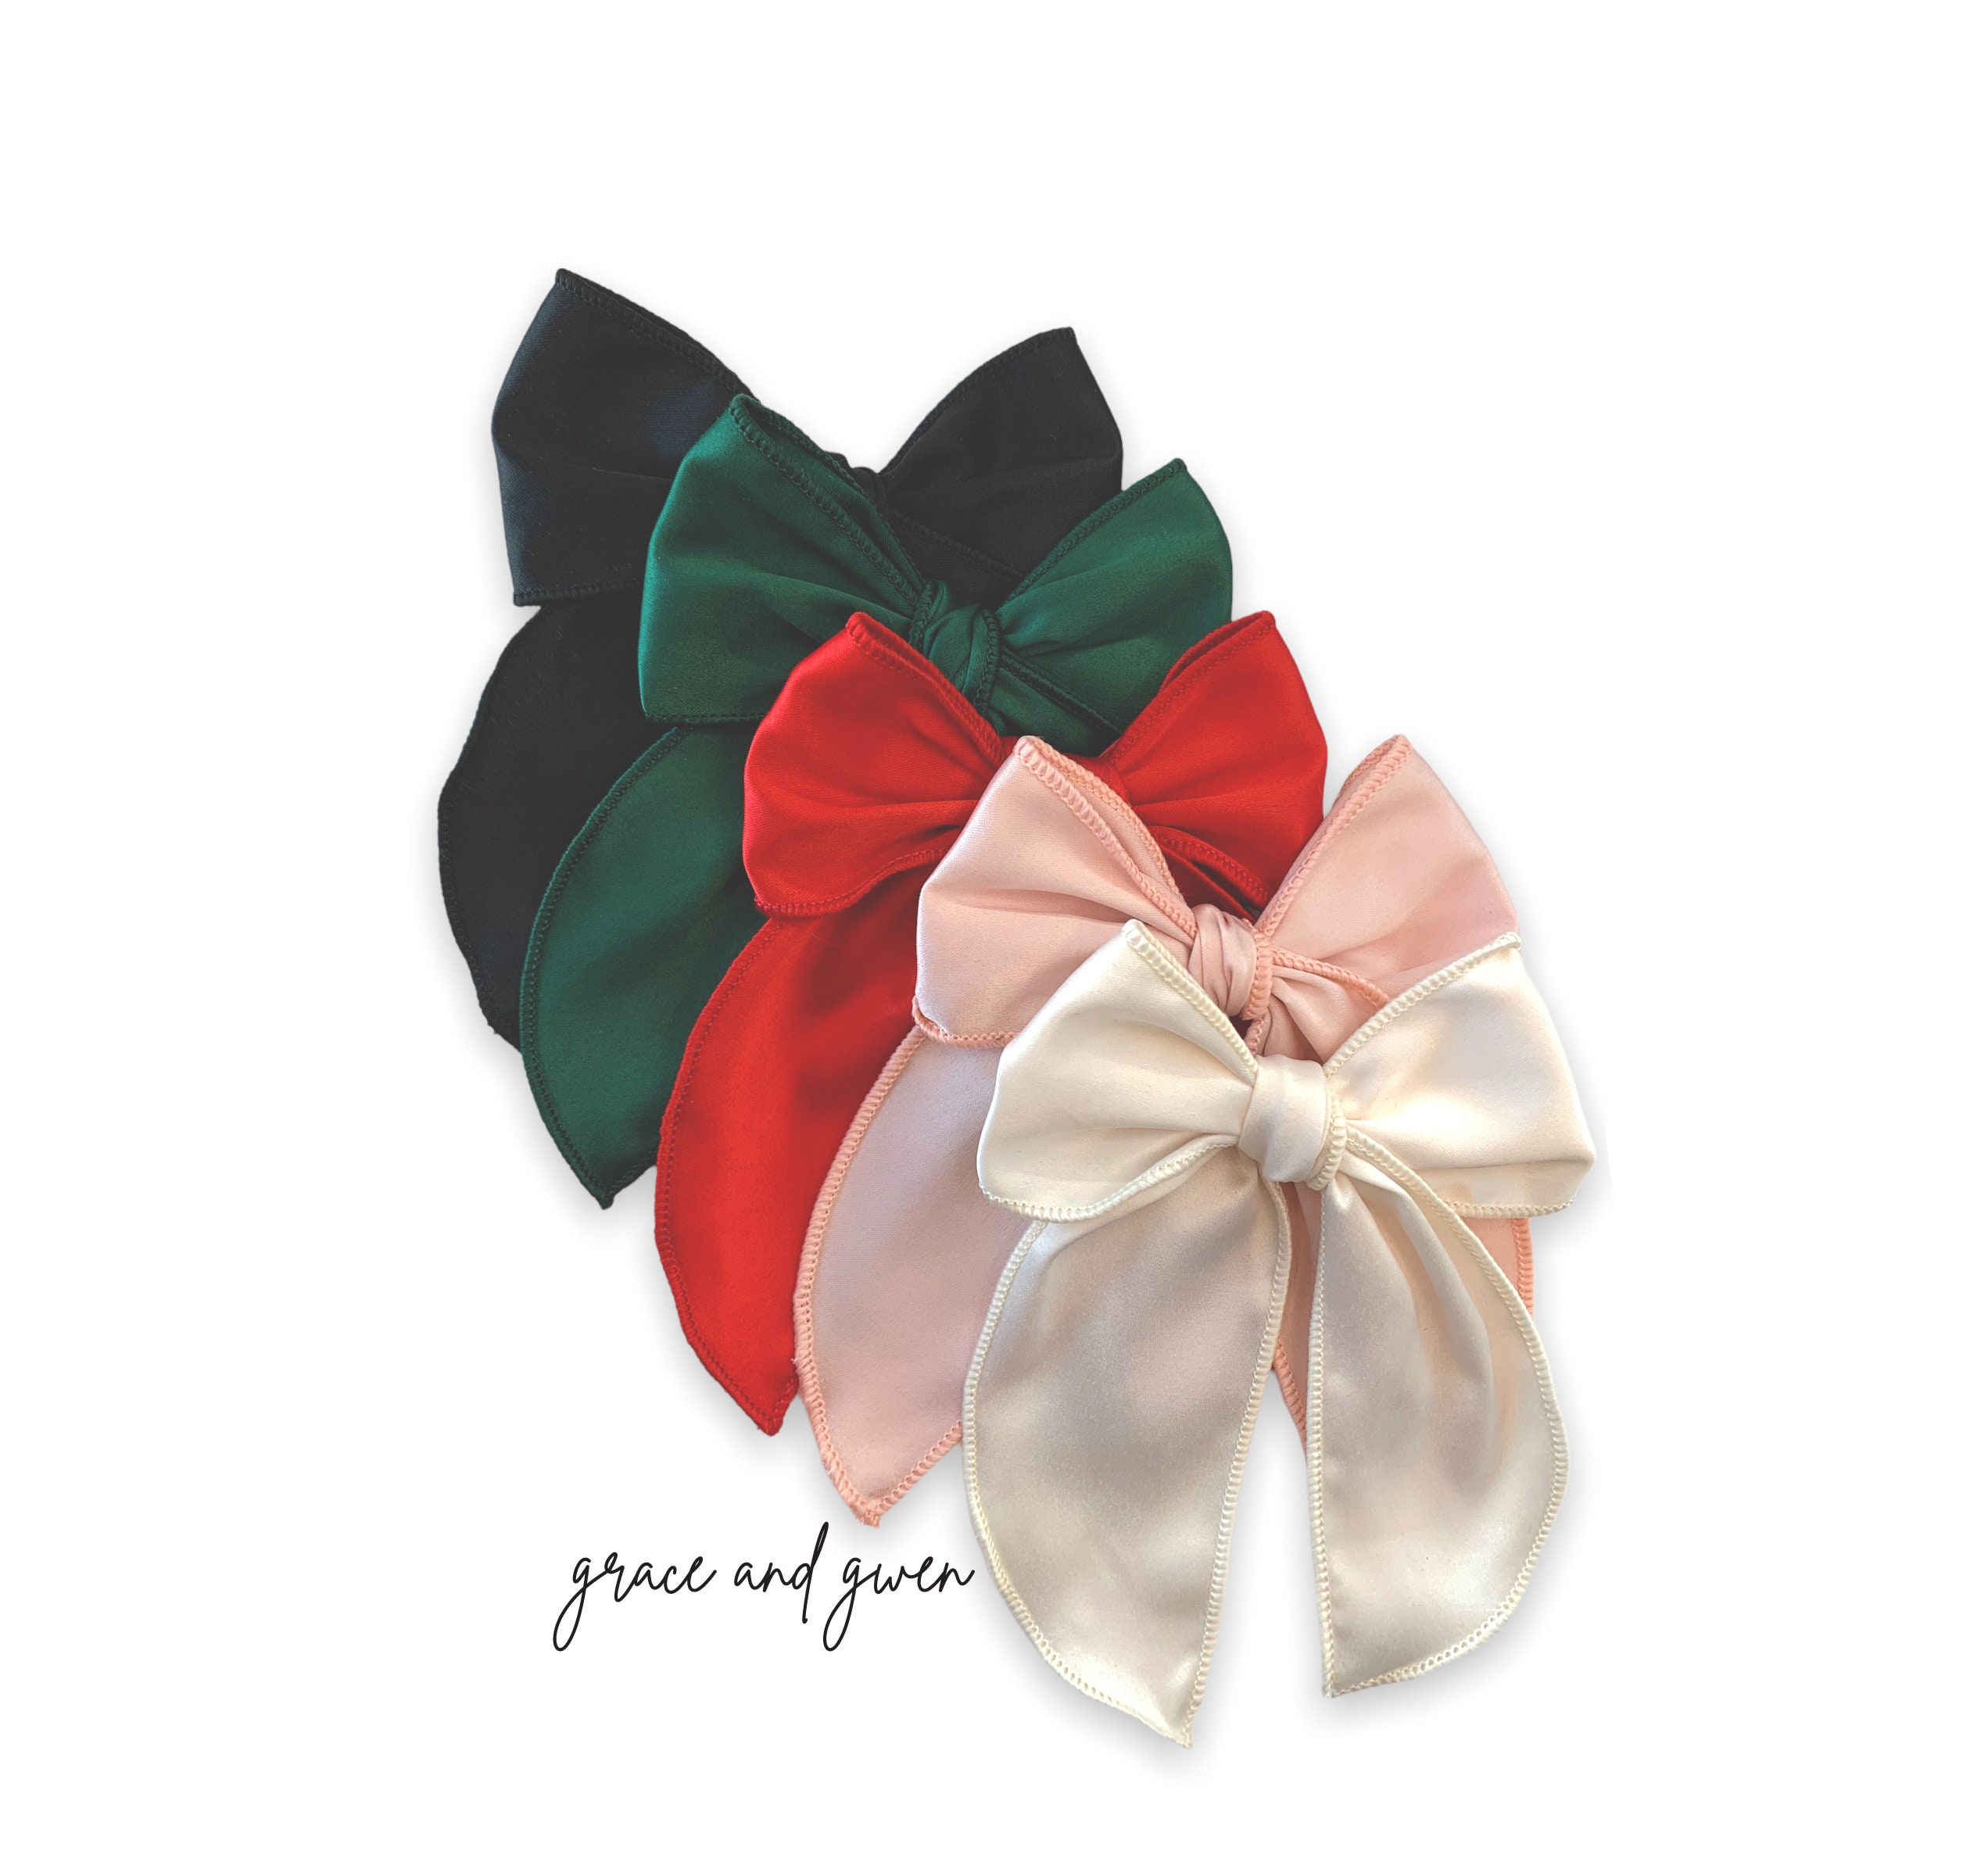 Satin Bows, Silk Bow, Red Satin Bow, Pink Bow, Mint Color Bow, Black Bow,  Bow Hair Clamp, Hair Clip, Big Red Bow for Hair 